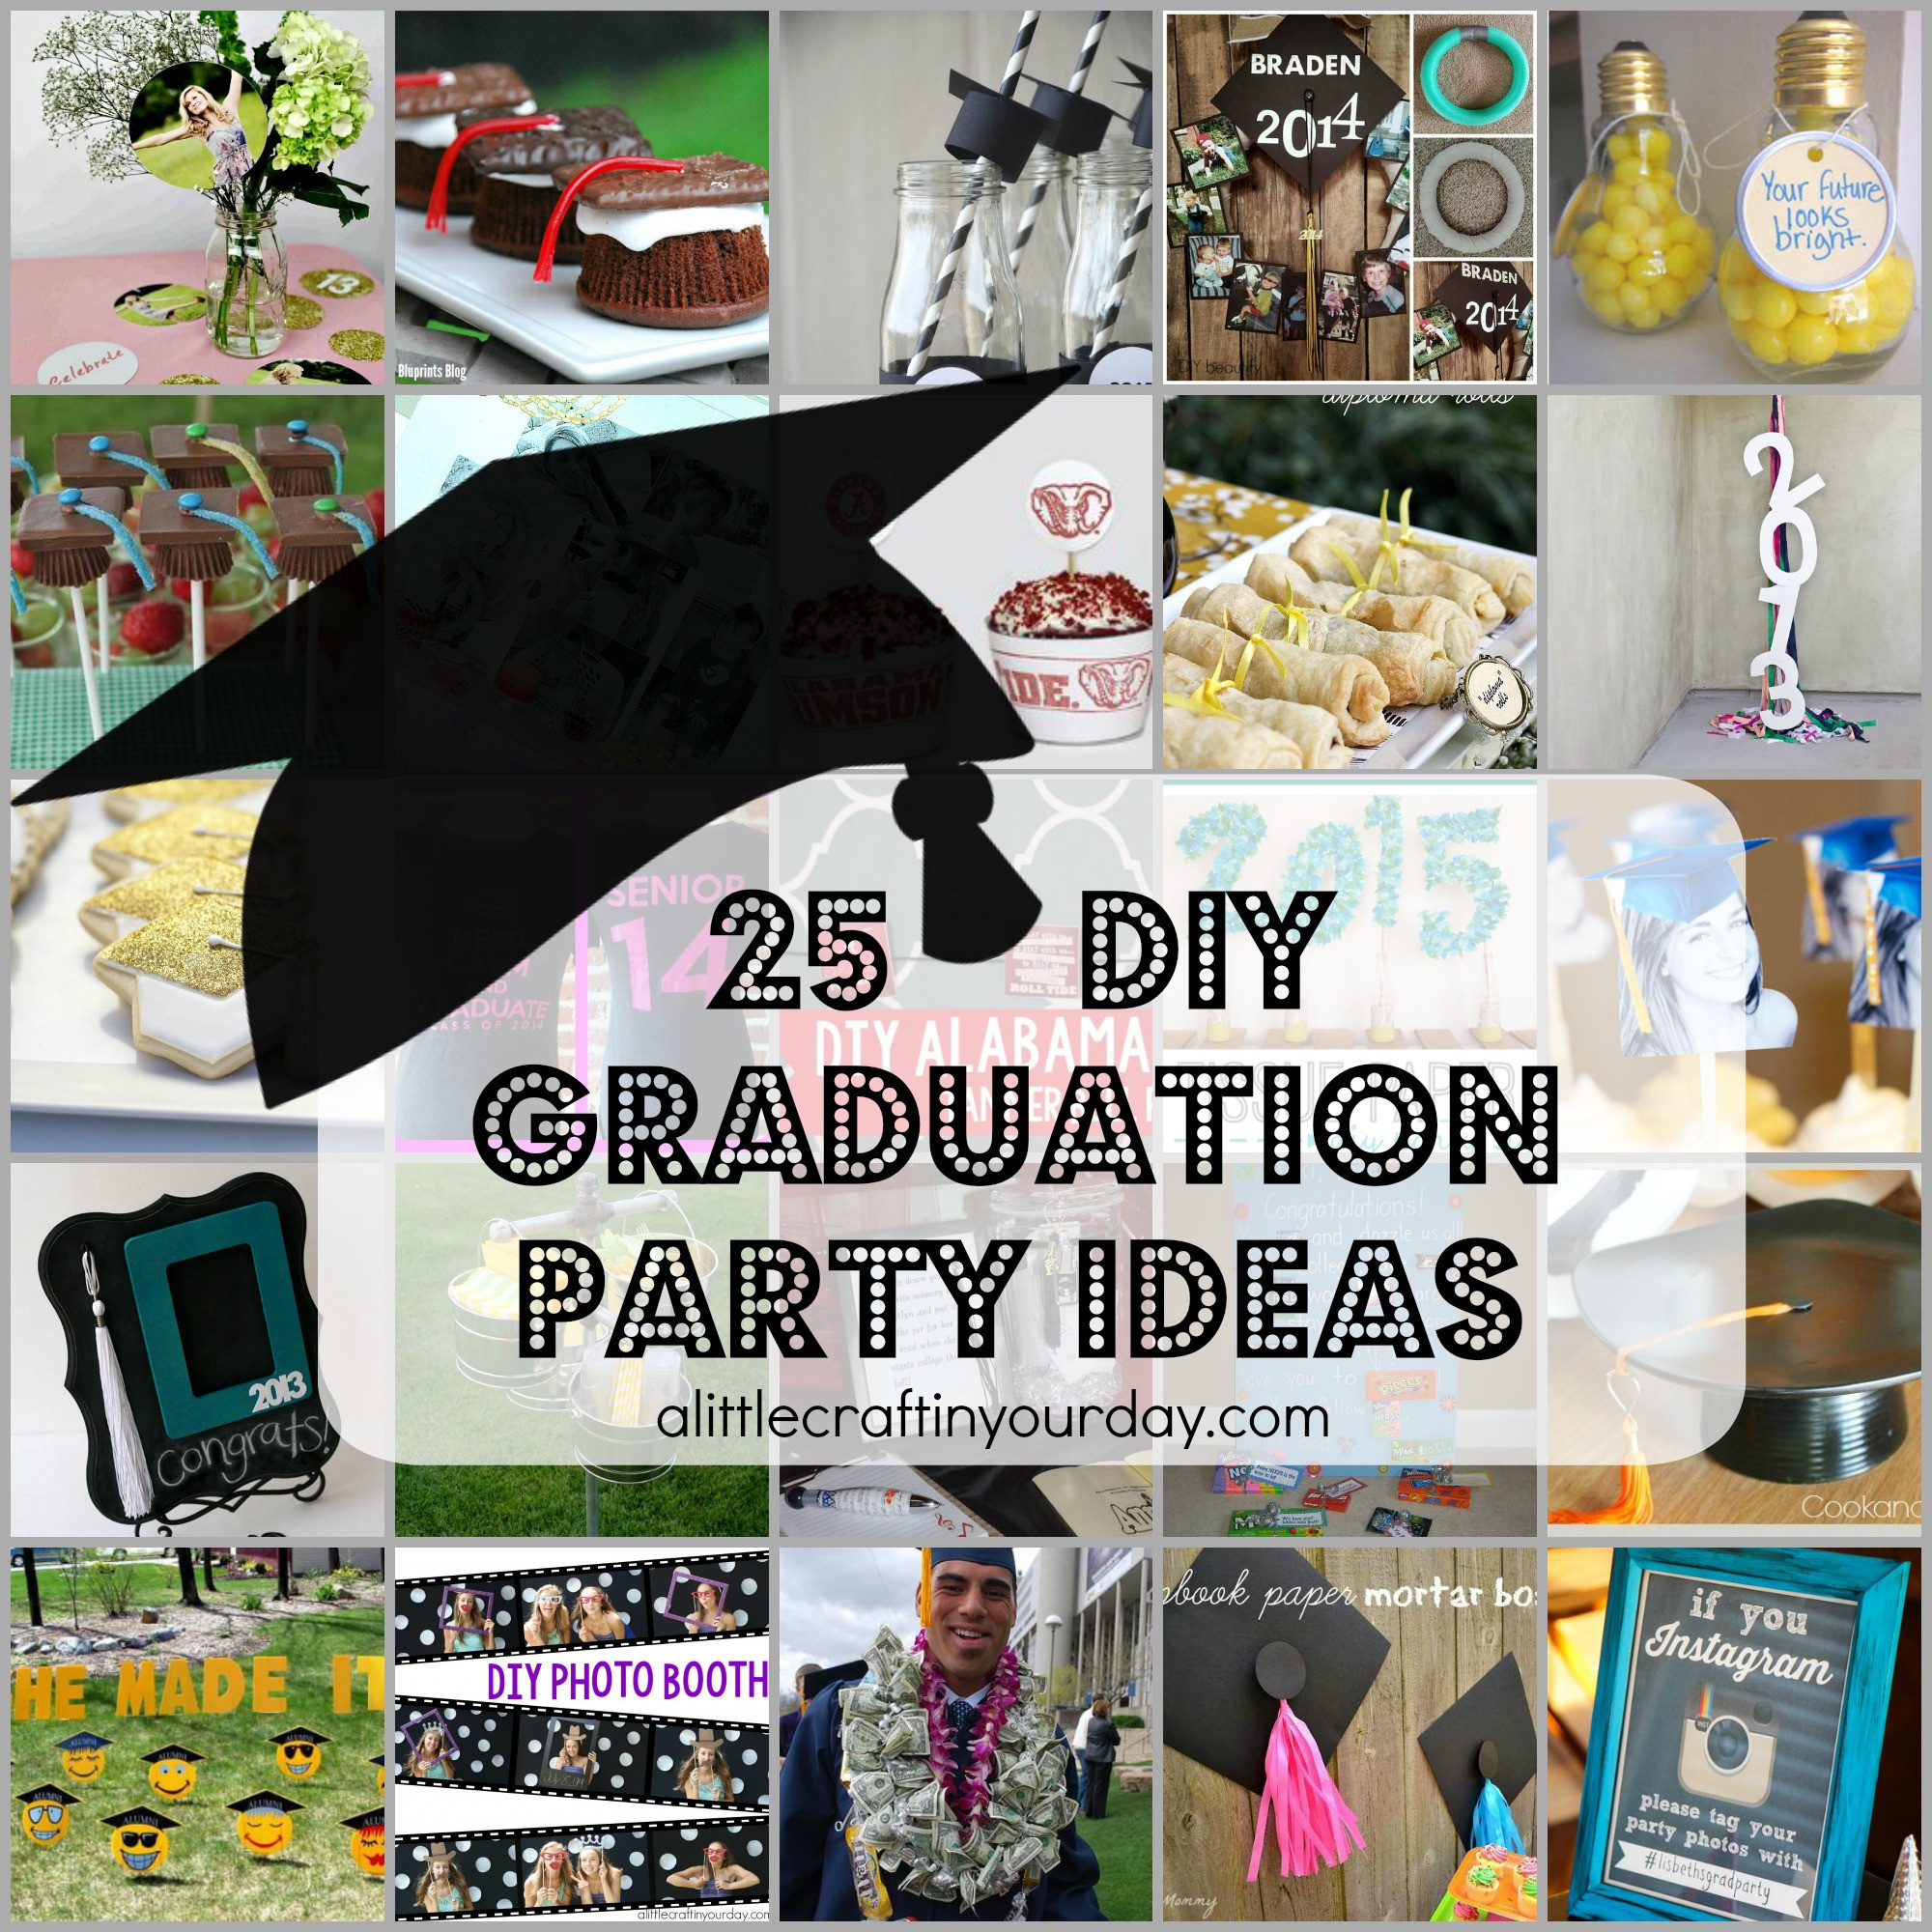 High School Graduation Party Theme Ideas
 25 DIY Graduation Party Ideas A Little Craft In Your Day